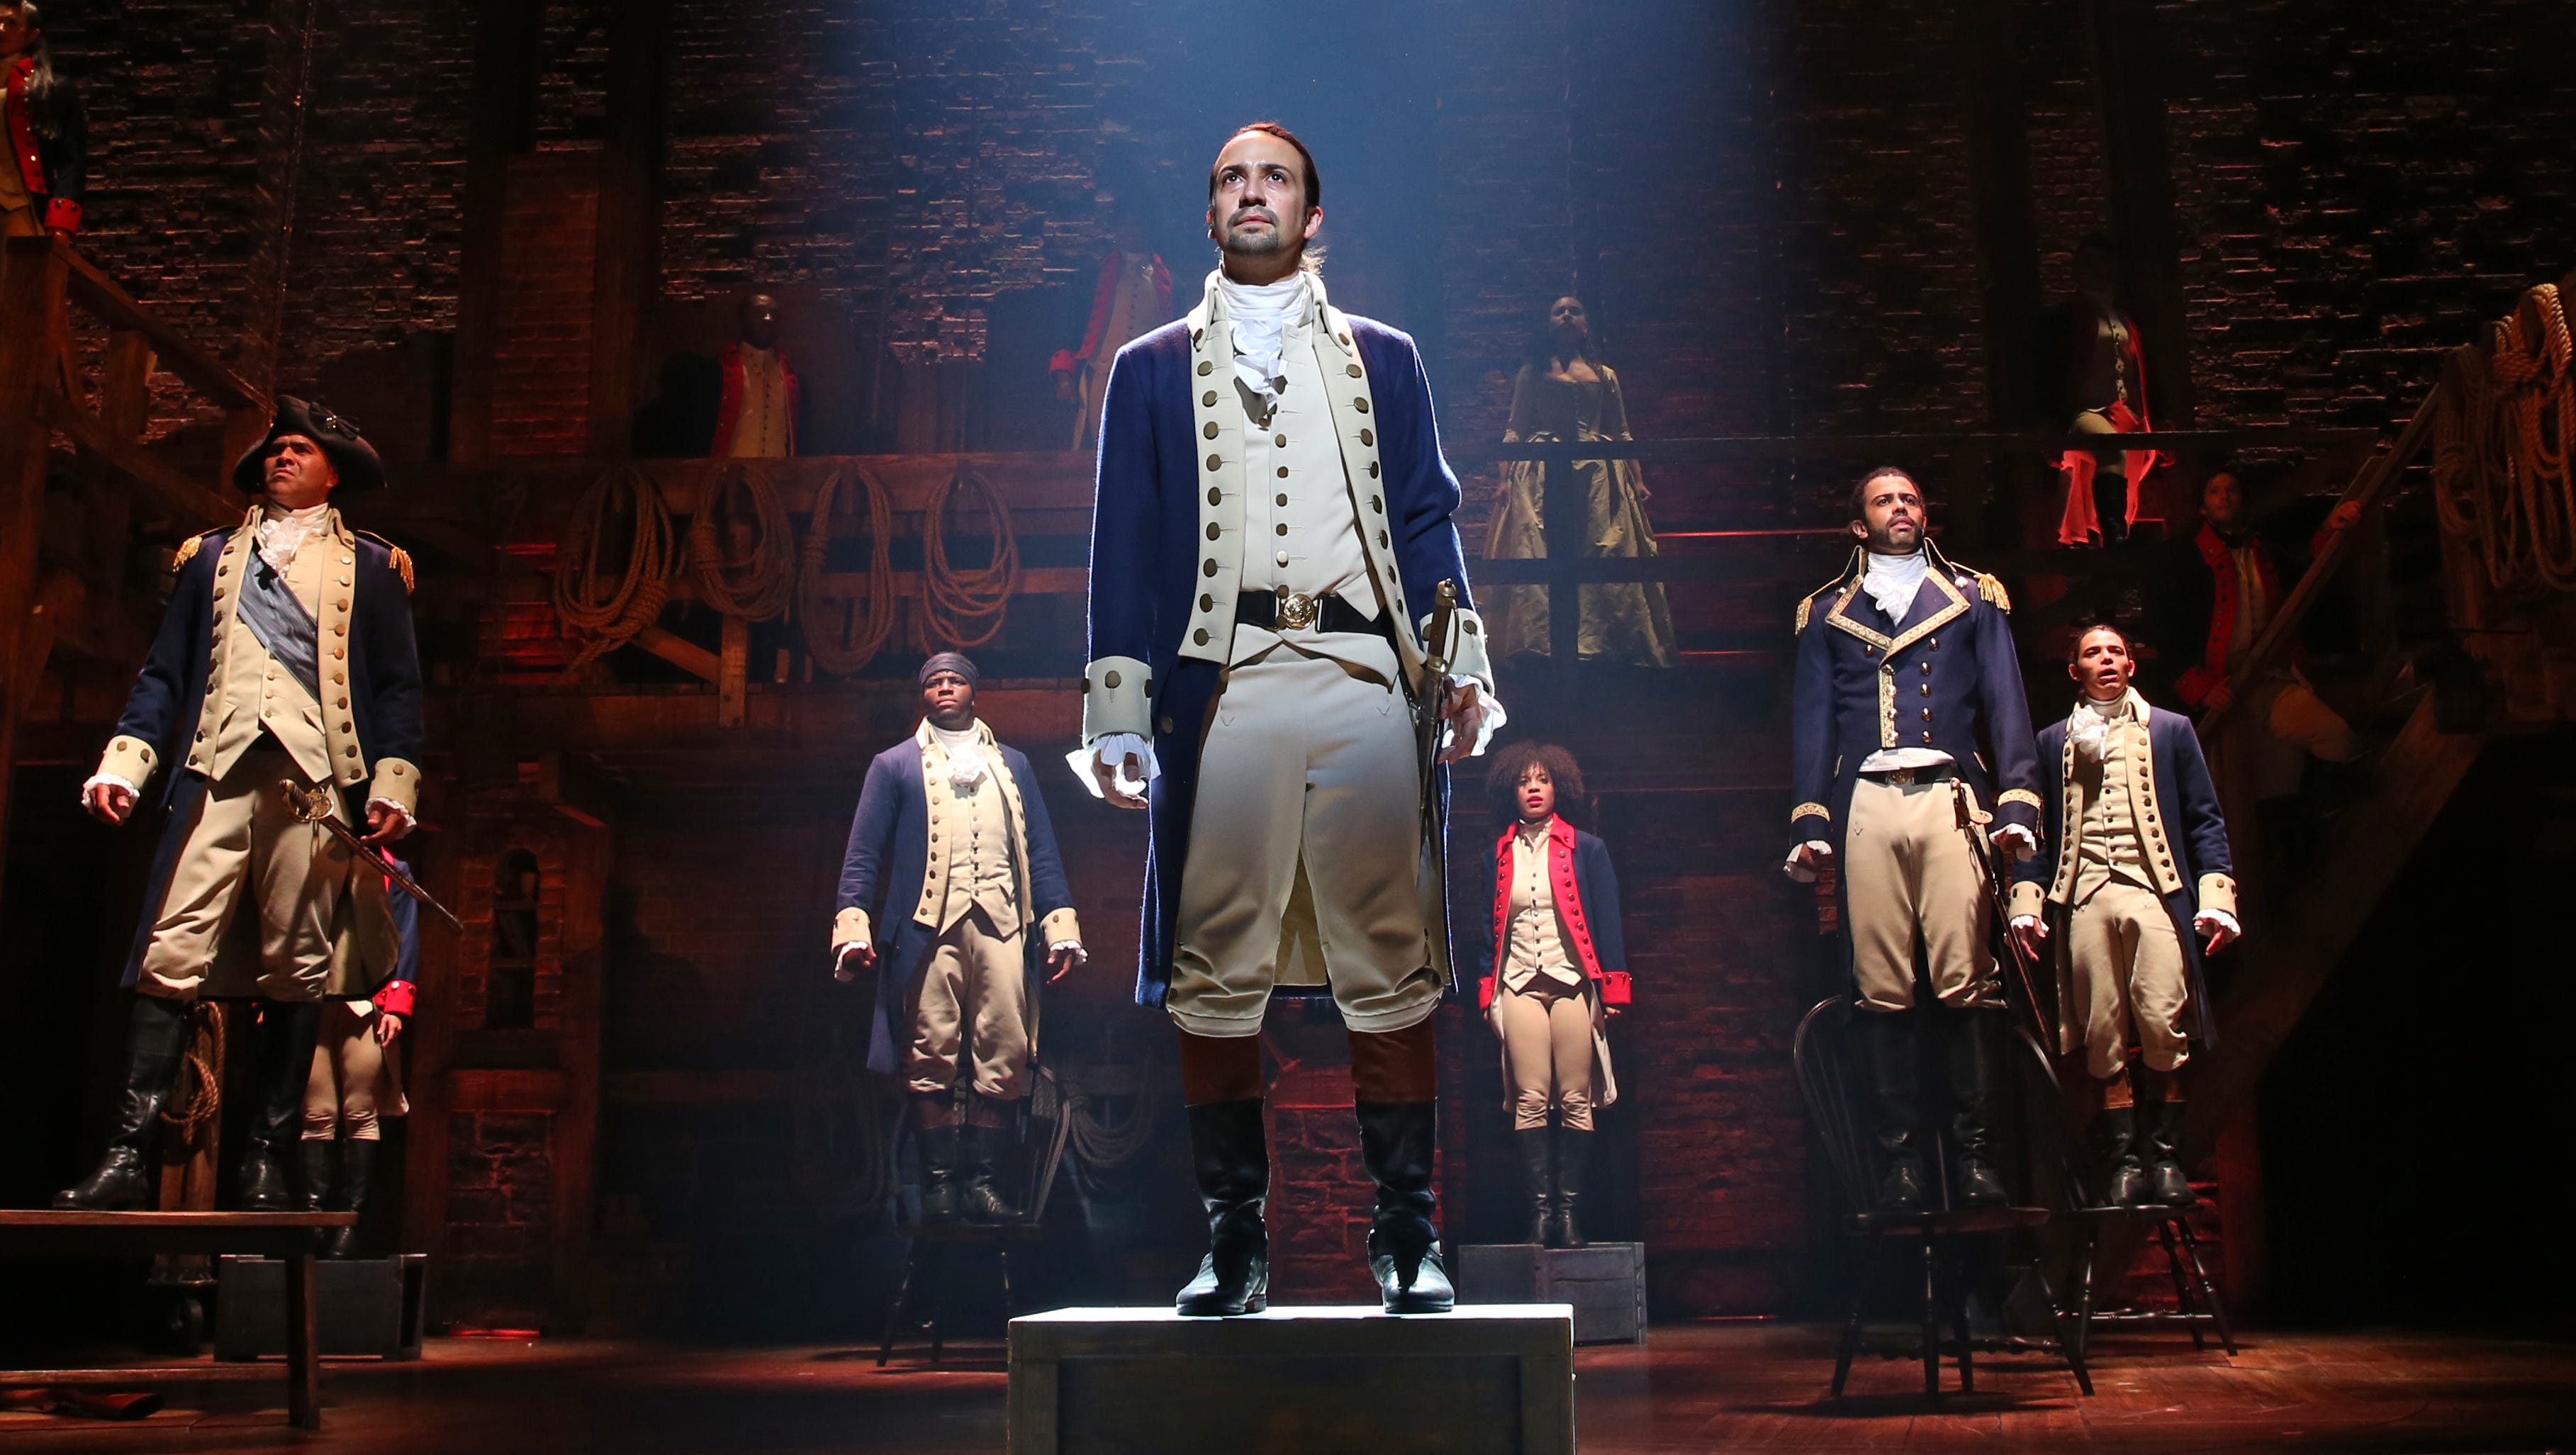 Image from the Broadway Musical Hamilton showing the title character in Revolutionary War-era costume flanked by other characters similarly dressed.